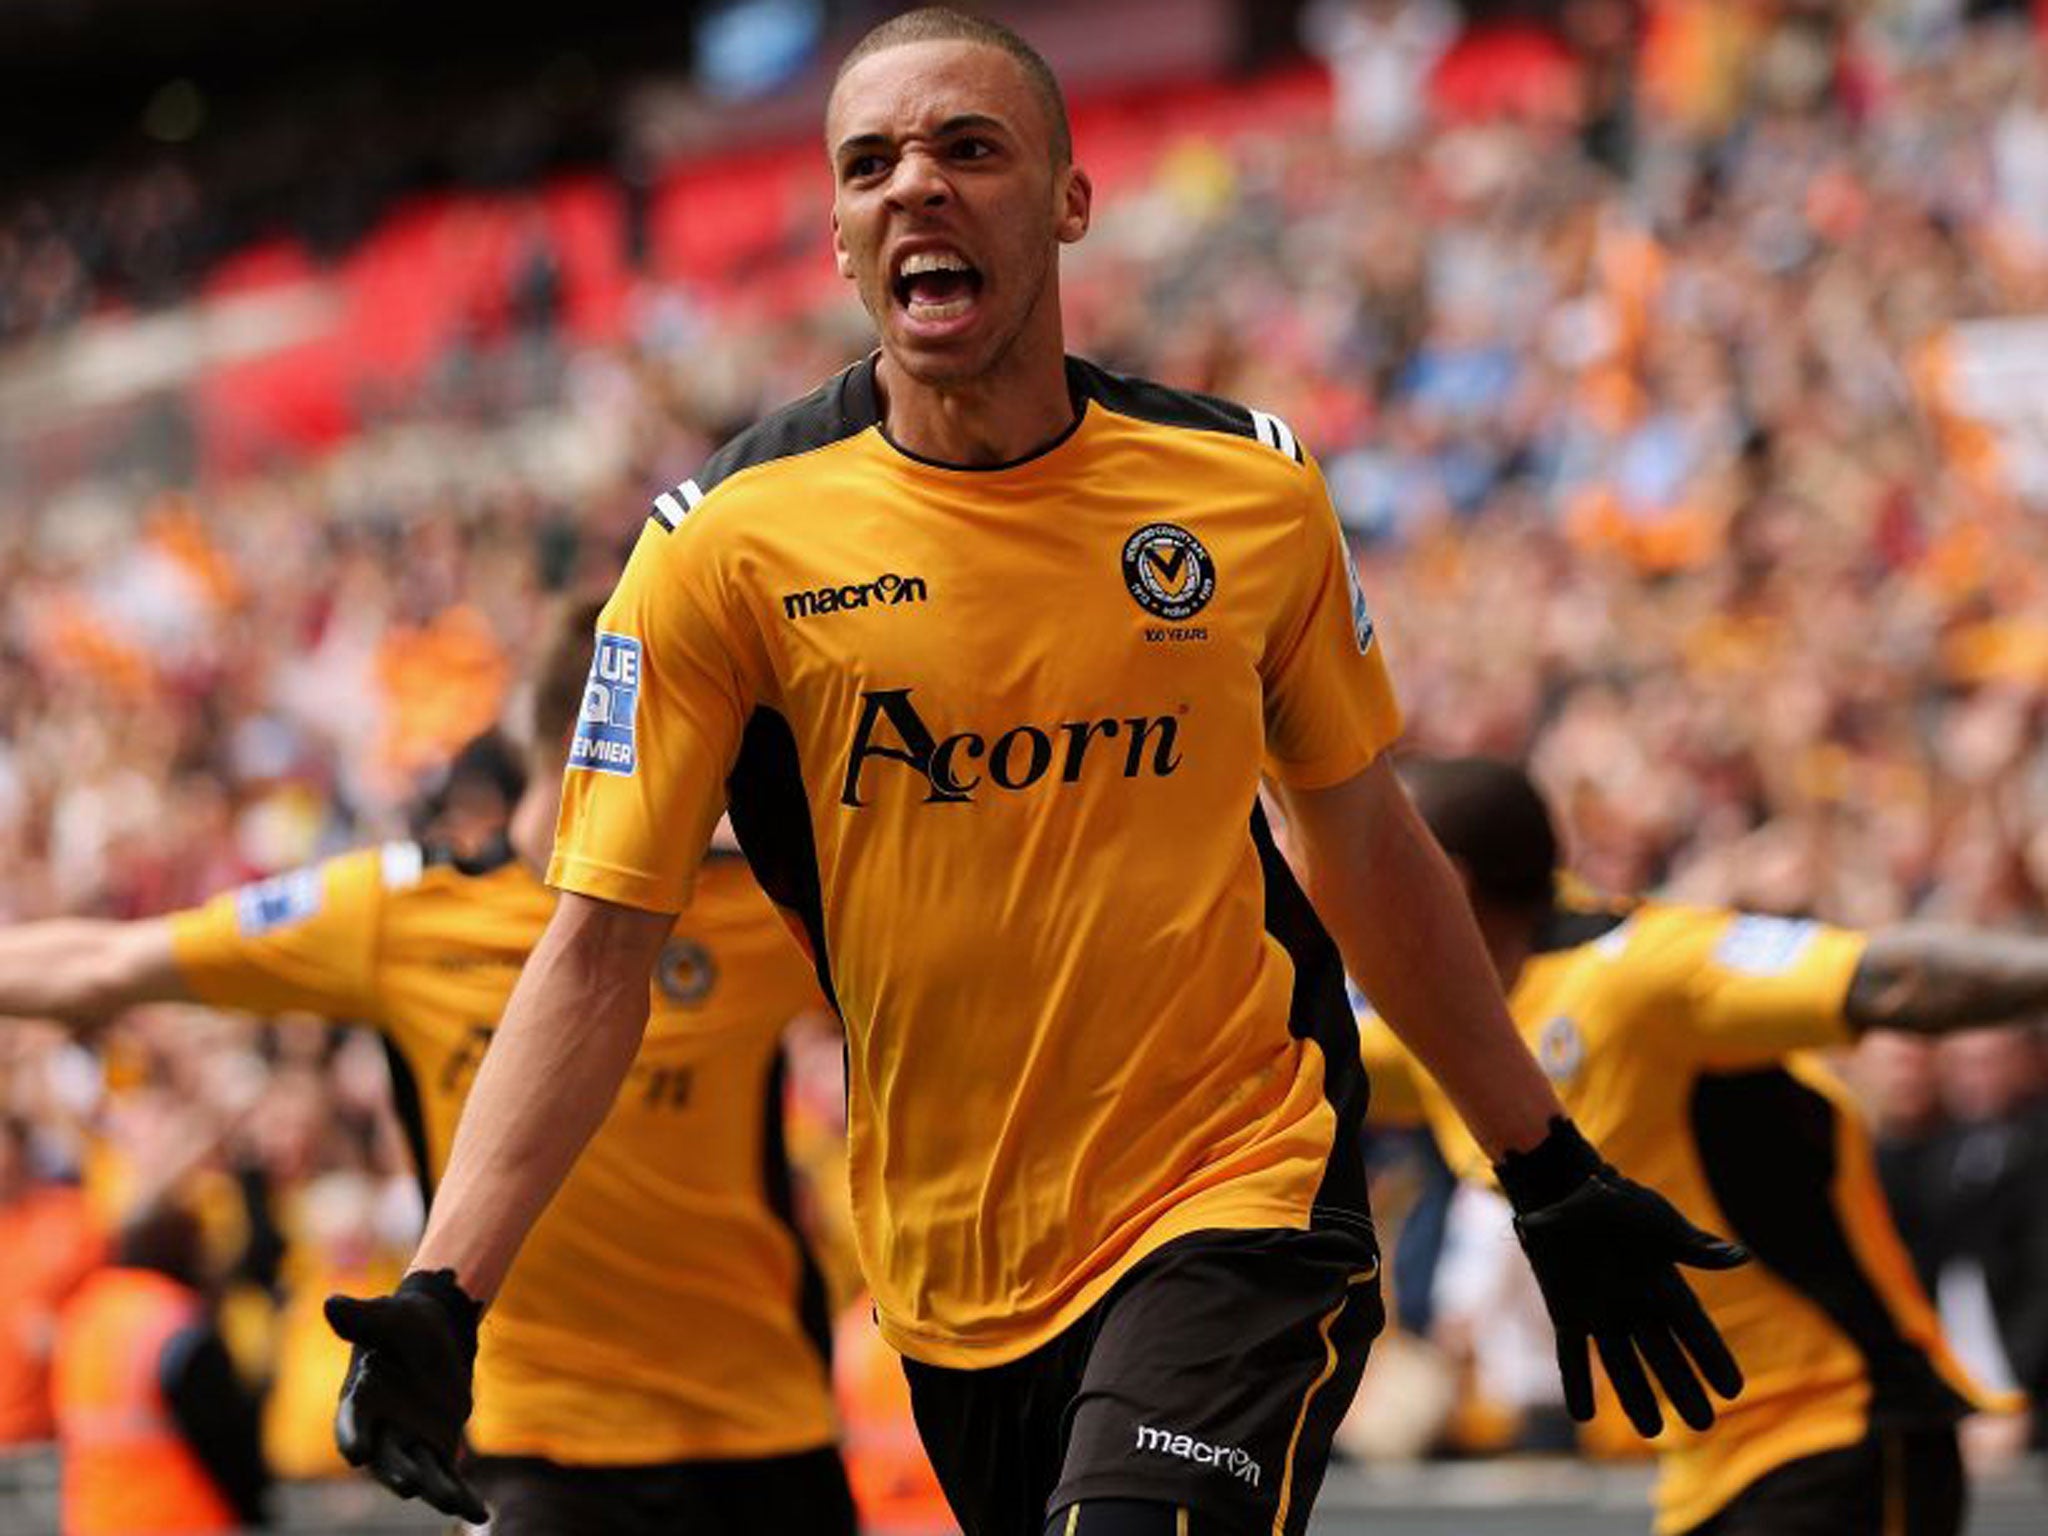 Christian Jolley of Newport County celebrates scoring a goal during the Blue Square Bet Premier Conference Play-off Final 